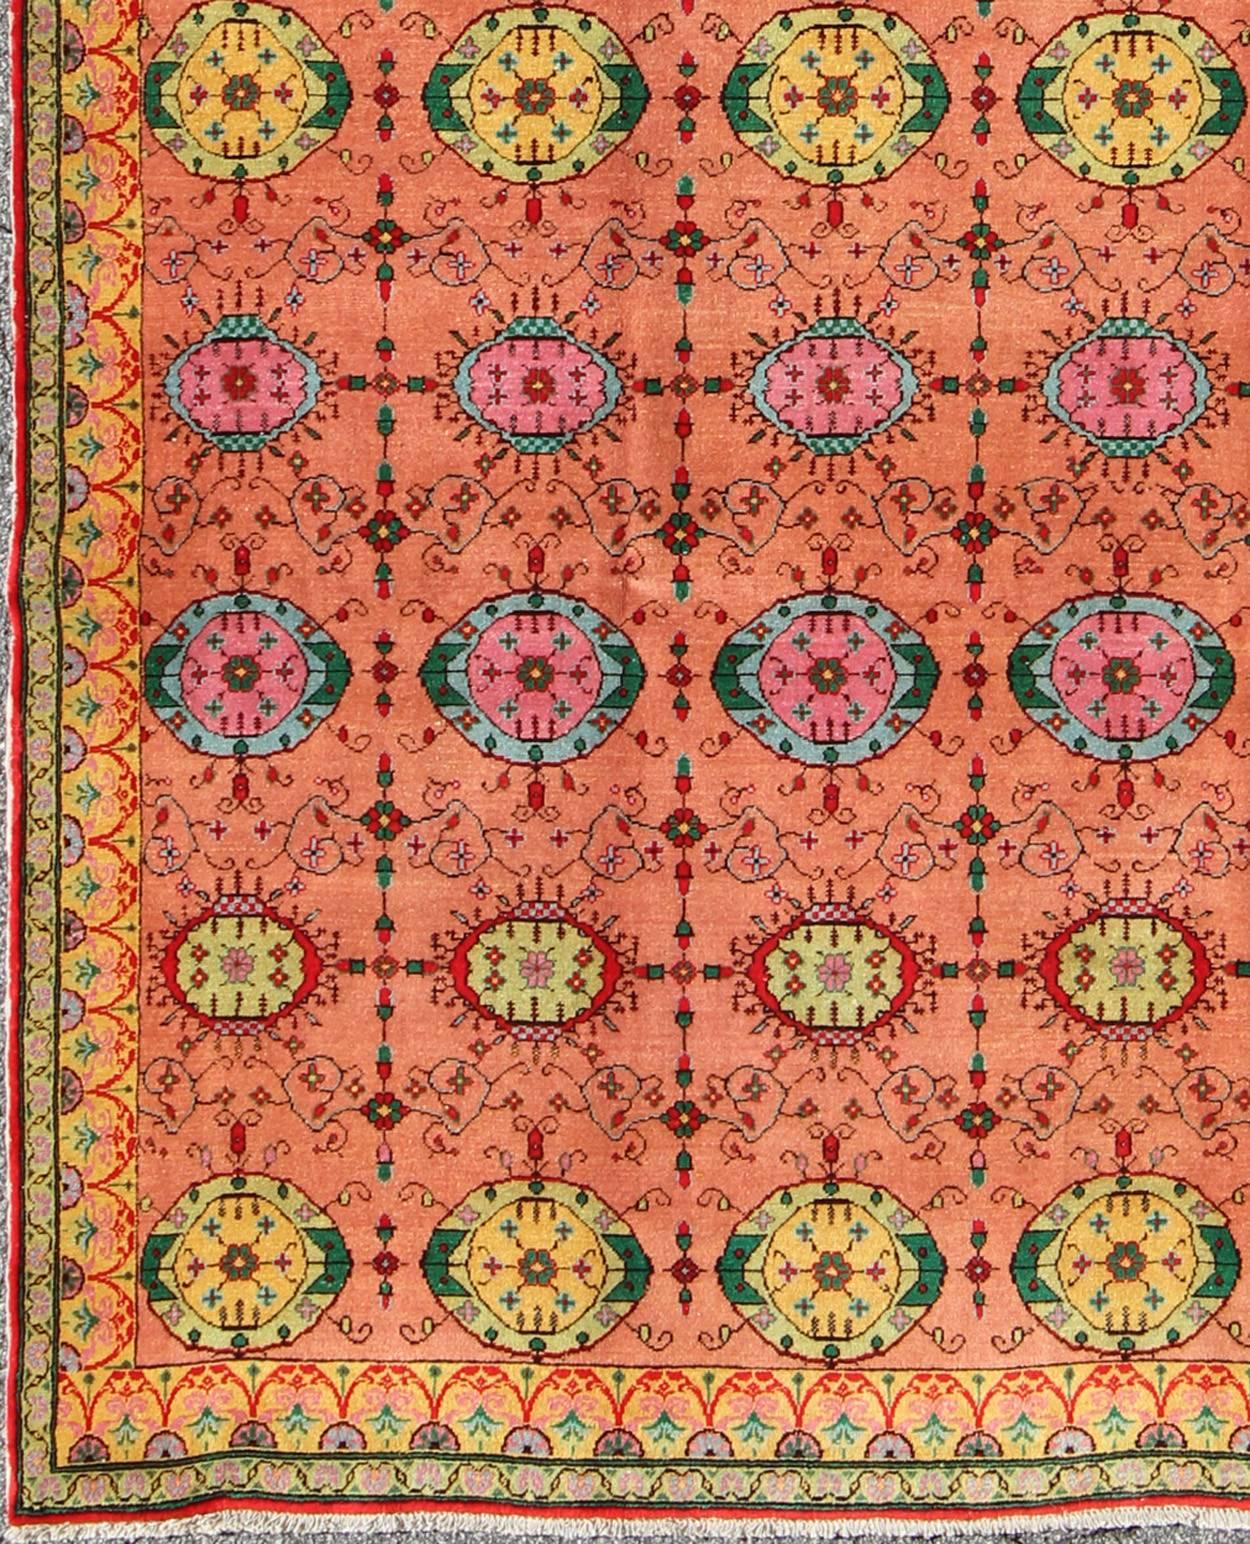 Brilliant Colors, Fine Turkish vintage Sivas rug with a unique design and color combination. tu-emd-136019. Unique Turkish fine rug
Beautiful Turkish mid-20th century craftsmanship and inspiring oriental design allow this masterpiece to fit